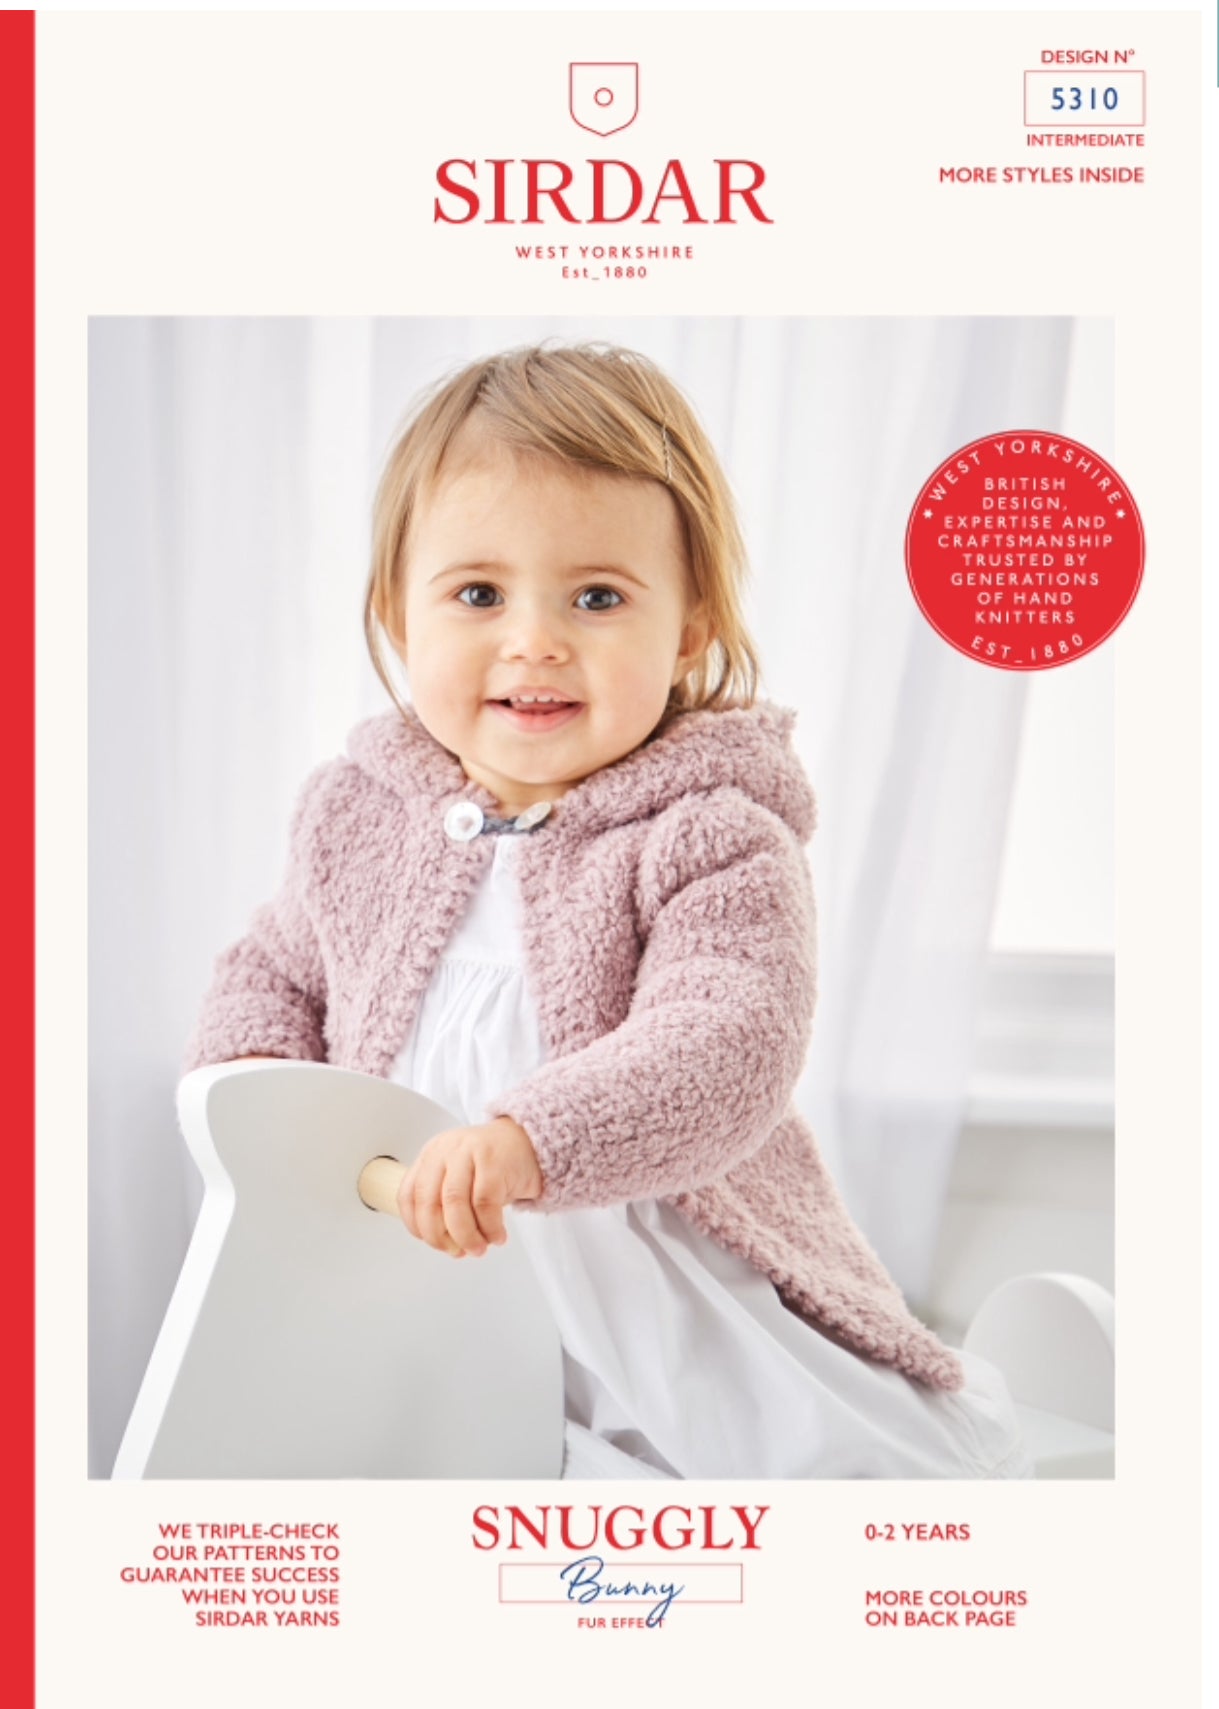 Sirdar 5310 Hooded Jacket and Round Neck Jacket in Snuggly Bunny